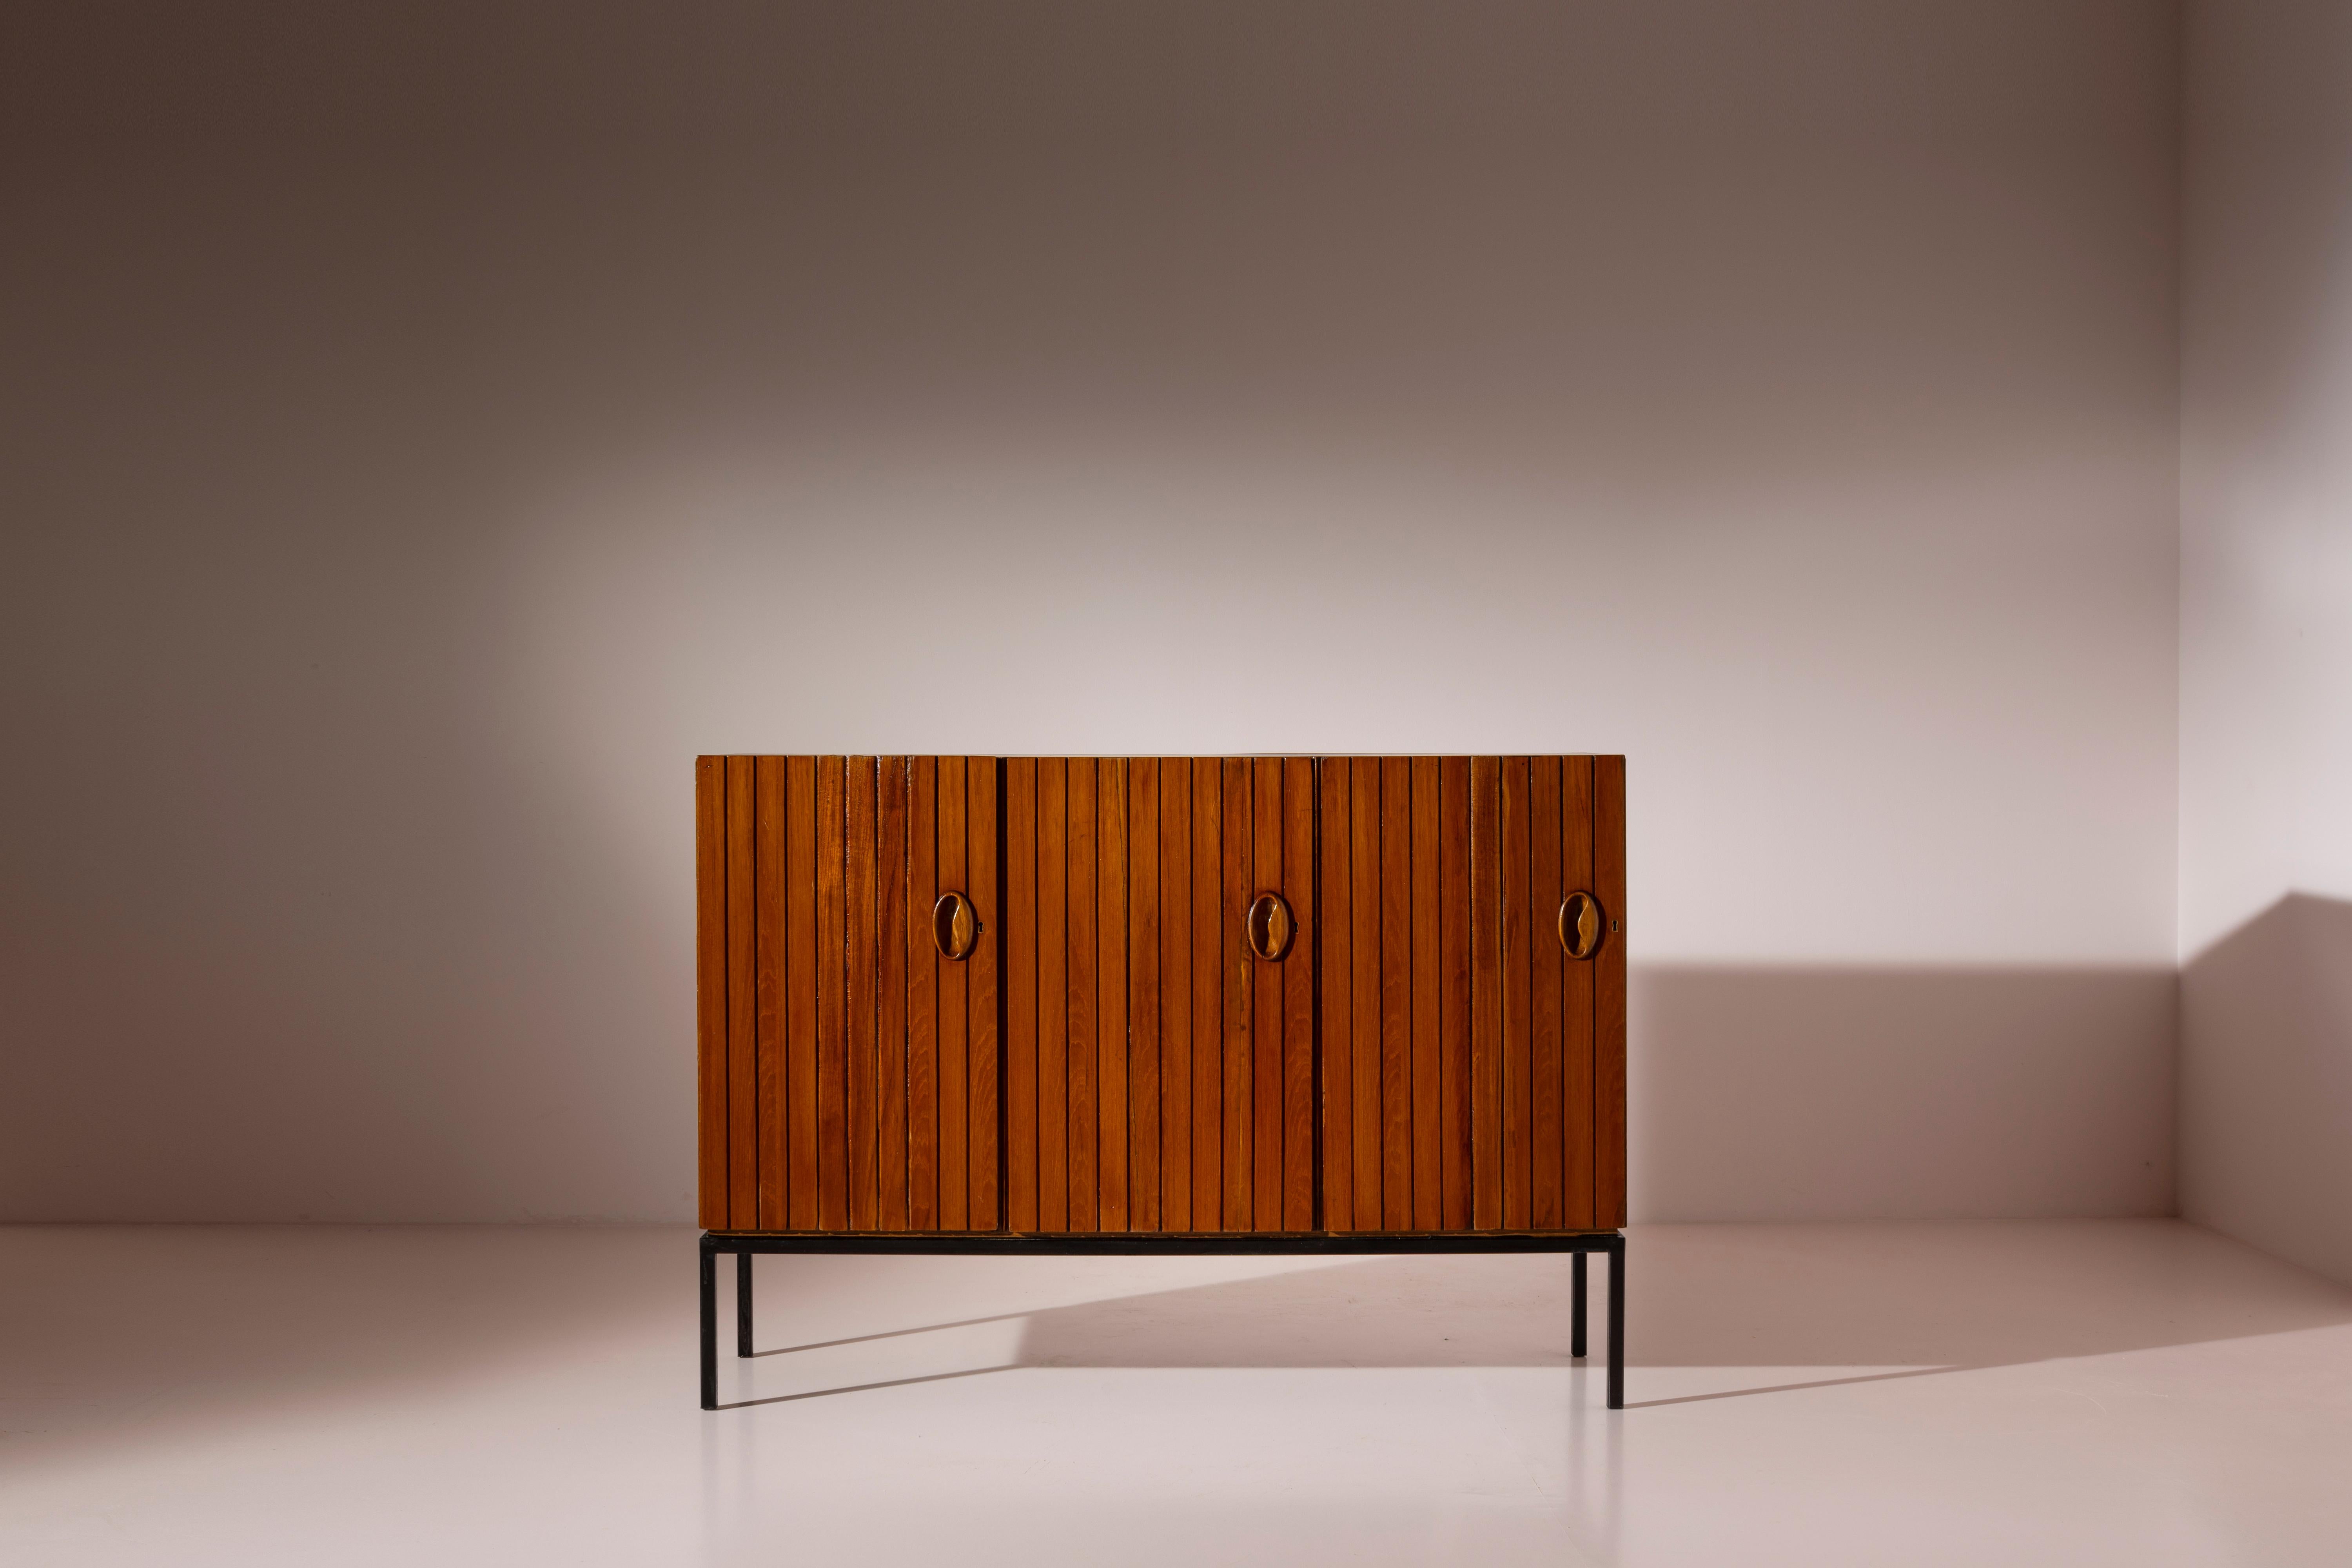 This sideboard, crafted from painted metal and teak, featuring internal doors and drawers, represents an exemplary piece of Italian craftsmanship under the distinguished marque 